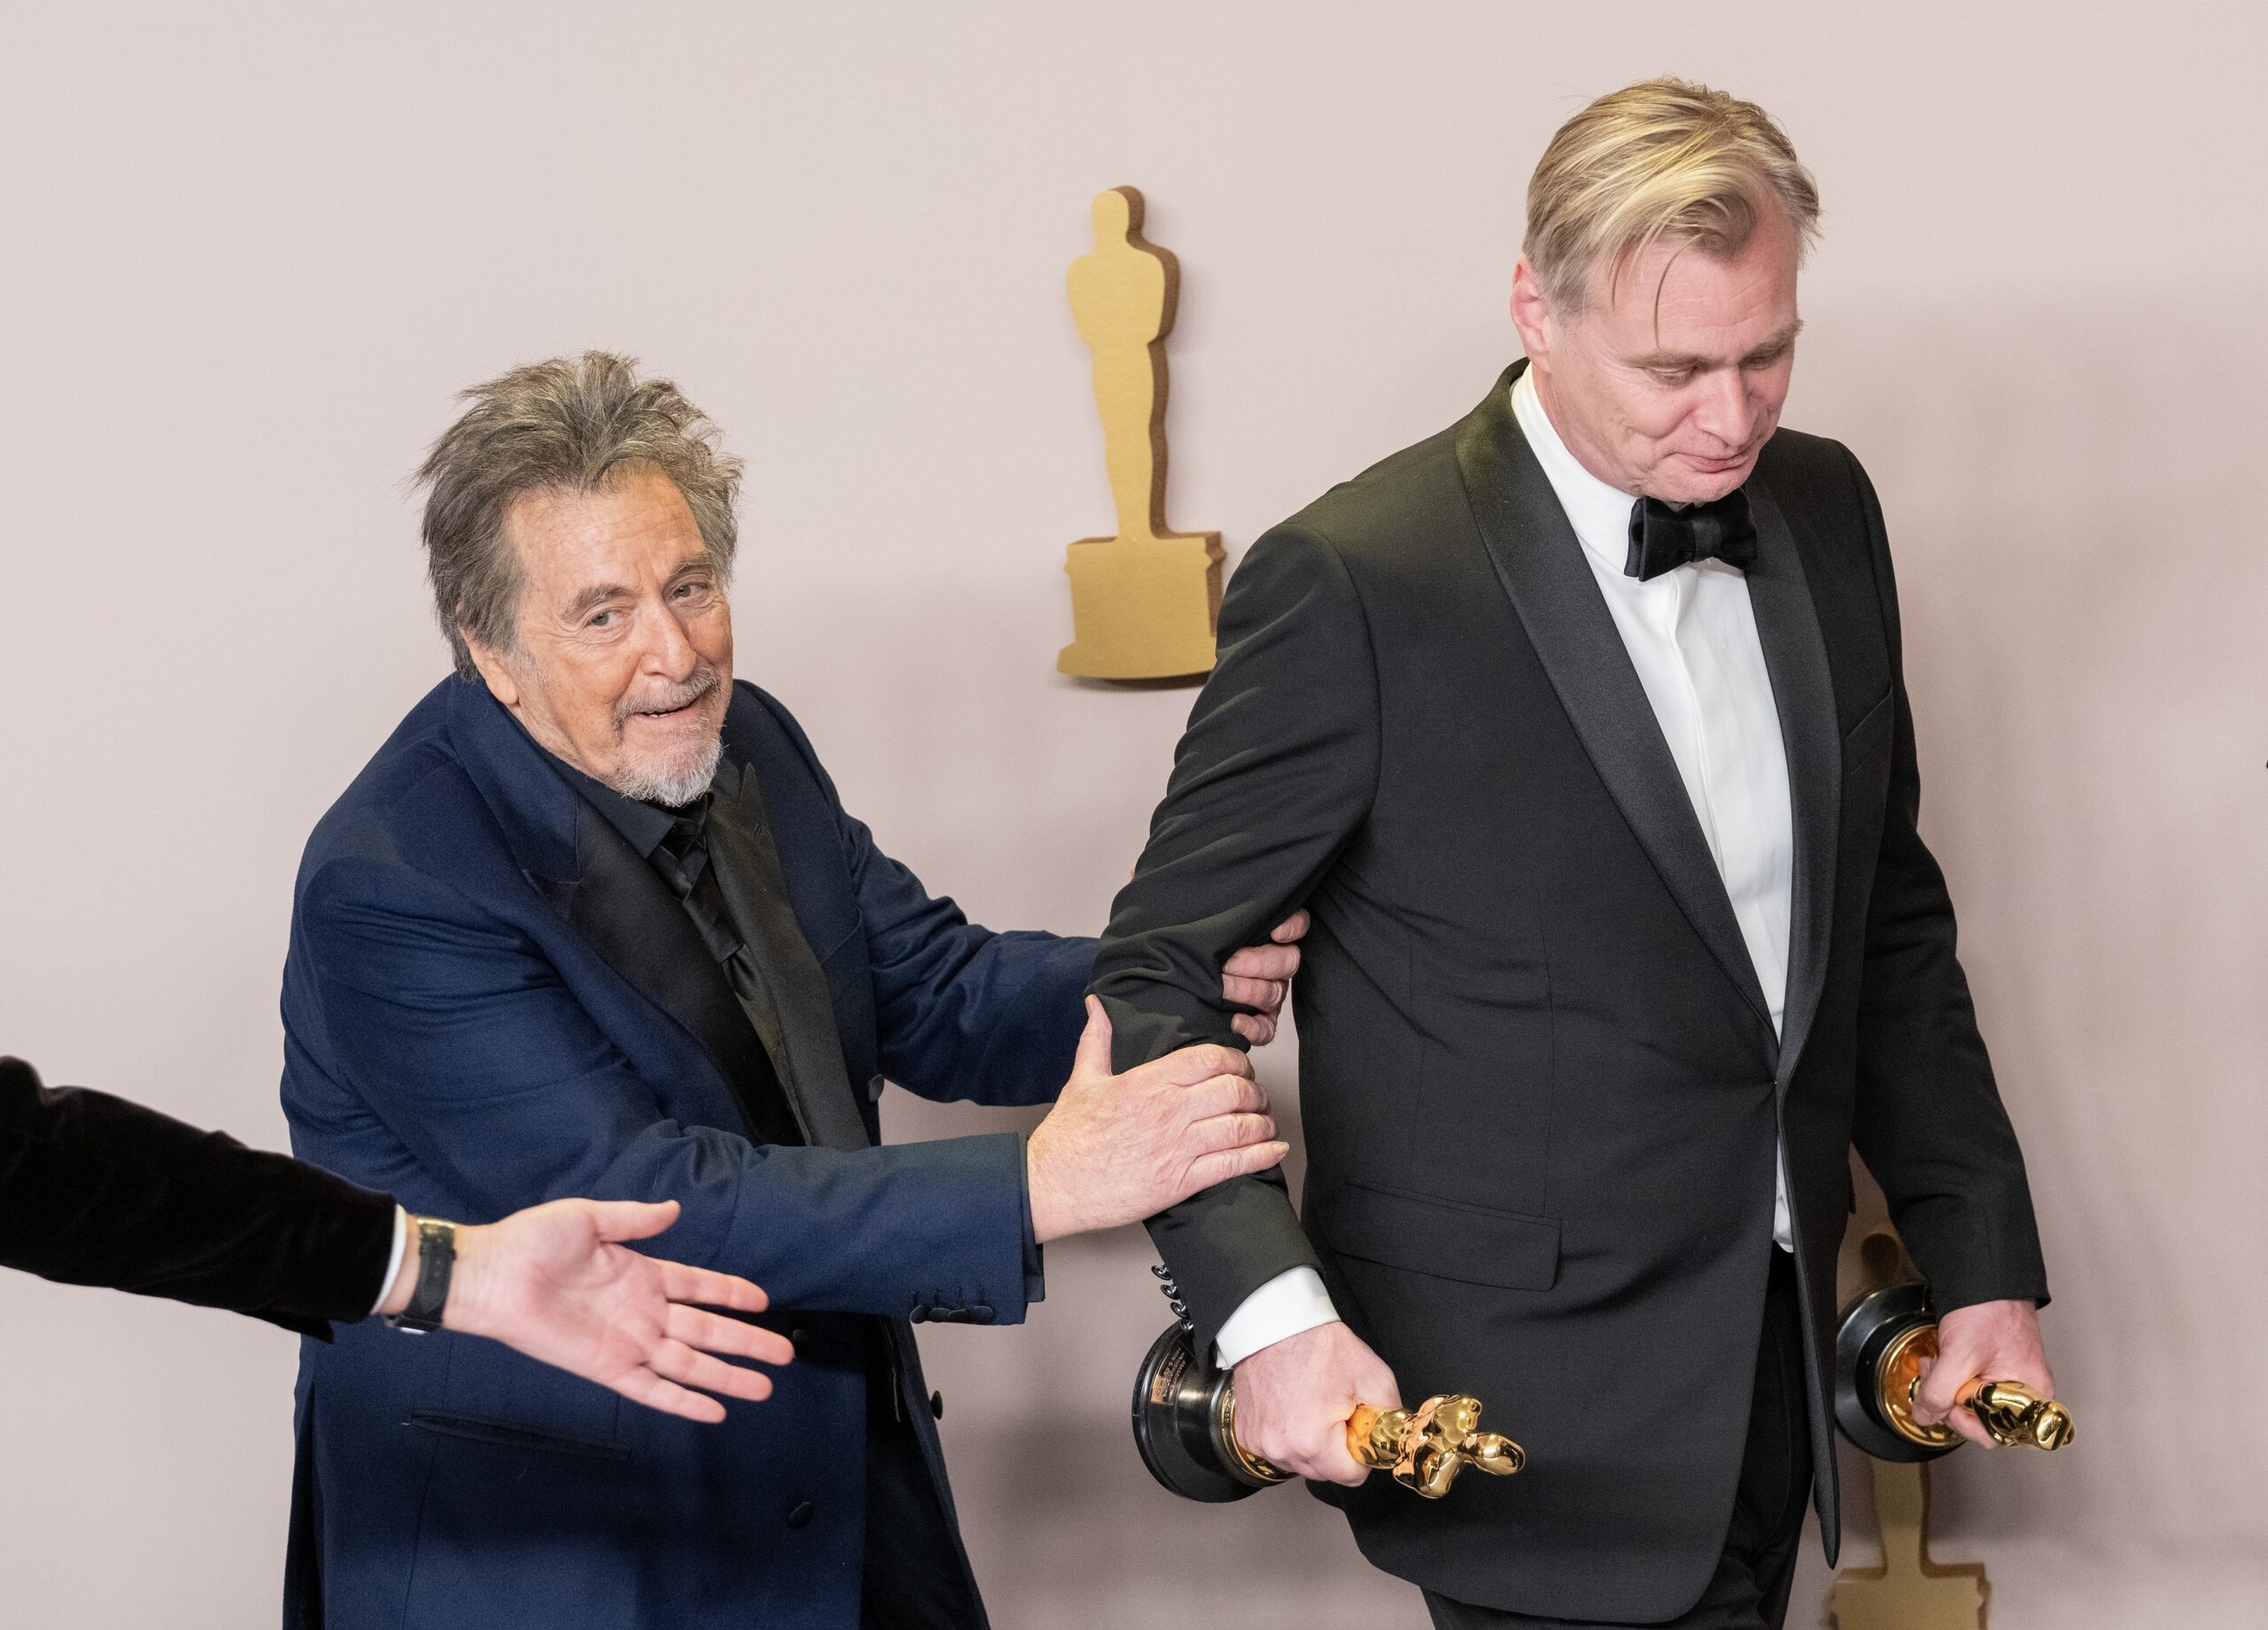 Presenter Al Pacino (L) holds on to Best Picture and Best Director winner Christopher Nolan backstage during the 96th annual Academy Awards in Los Angeles, California, on Sunday, March 10, 2024. Since 1929, the Oscars have recognized excellence in cinematic achievements. Photo by /UPI,Image: 855894850, License: Rights-managed, Restrictions: , Model Release: no, Credit line: PAT BENIC / UPI / Profimedia